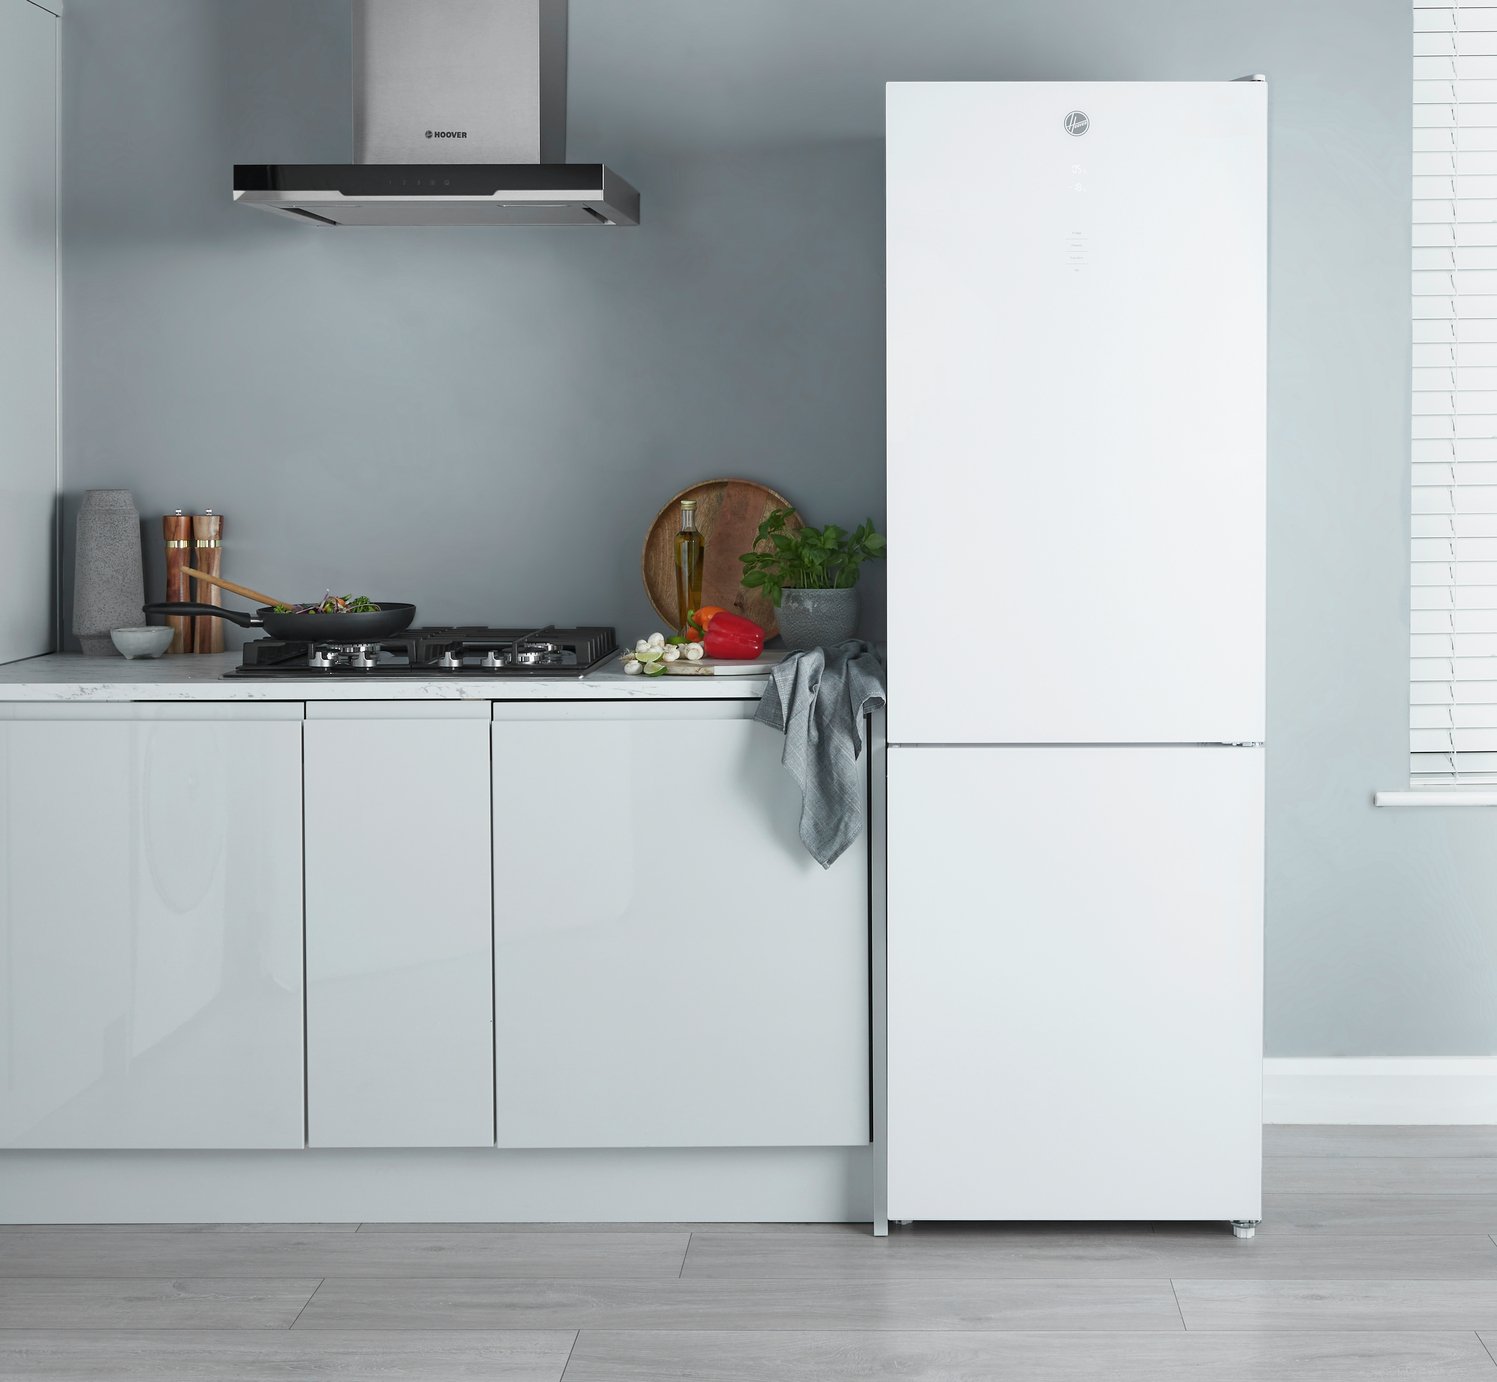 Hoover HFGD 6182W No Frost Fridge Freezer Review